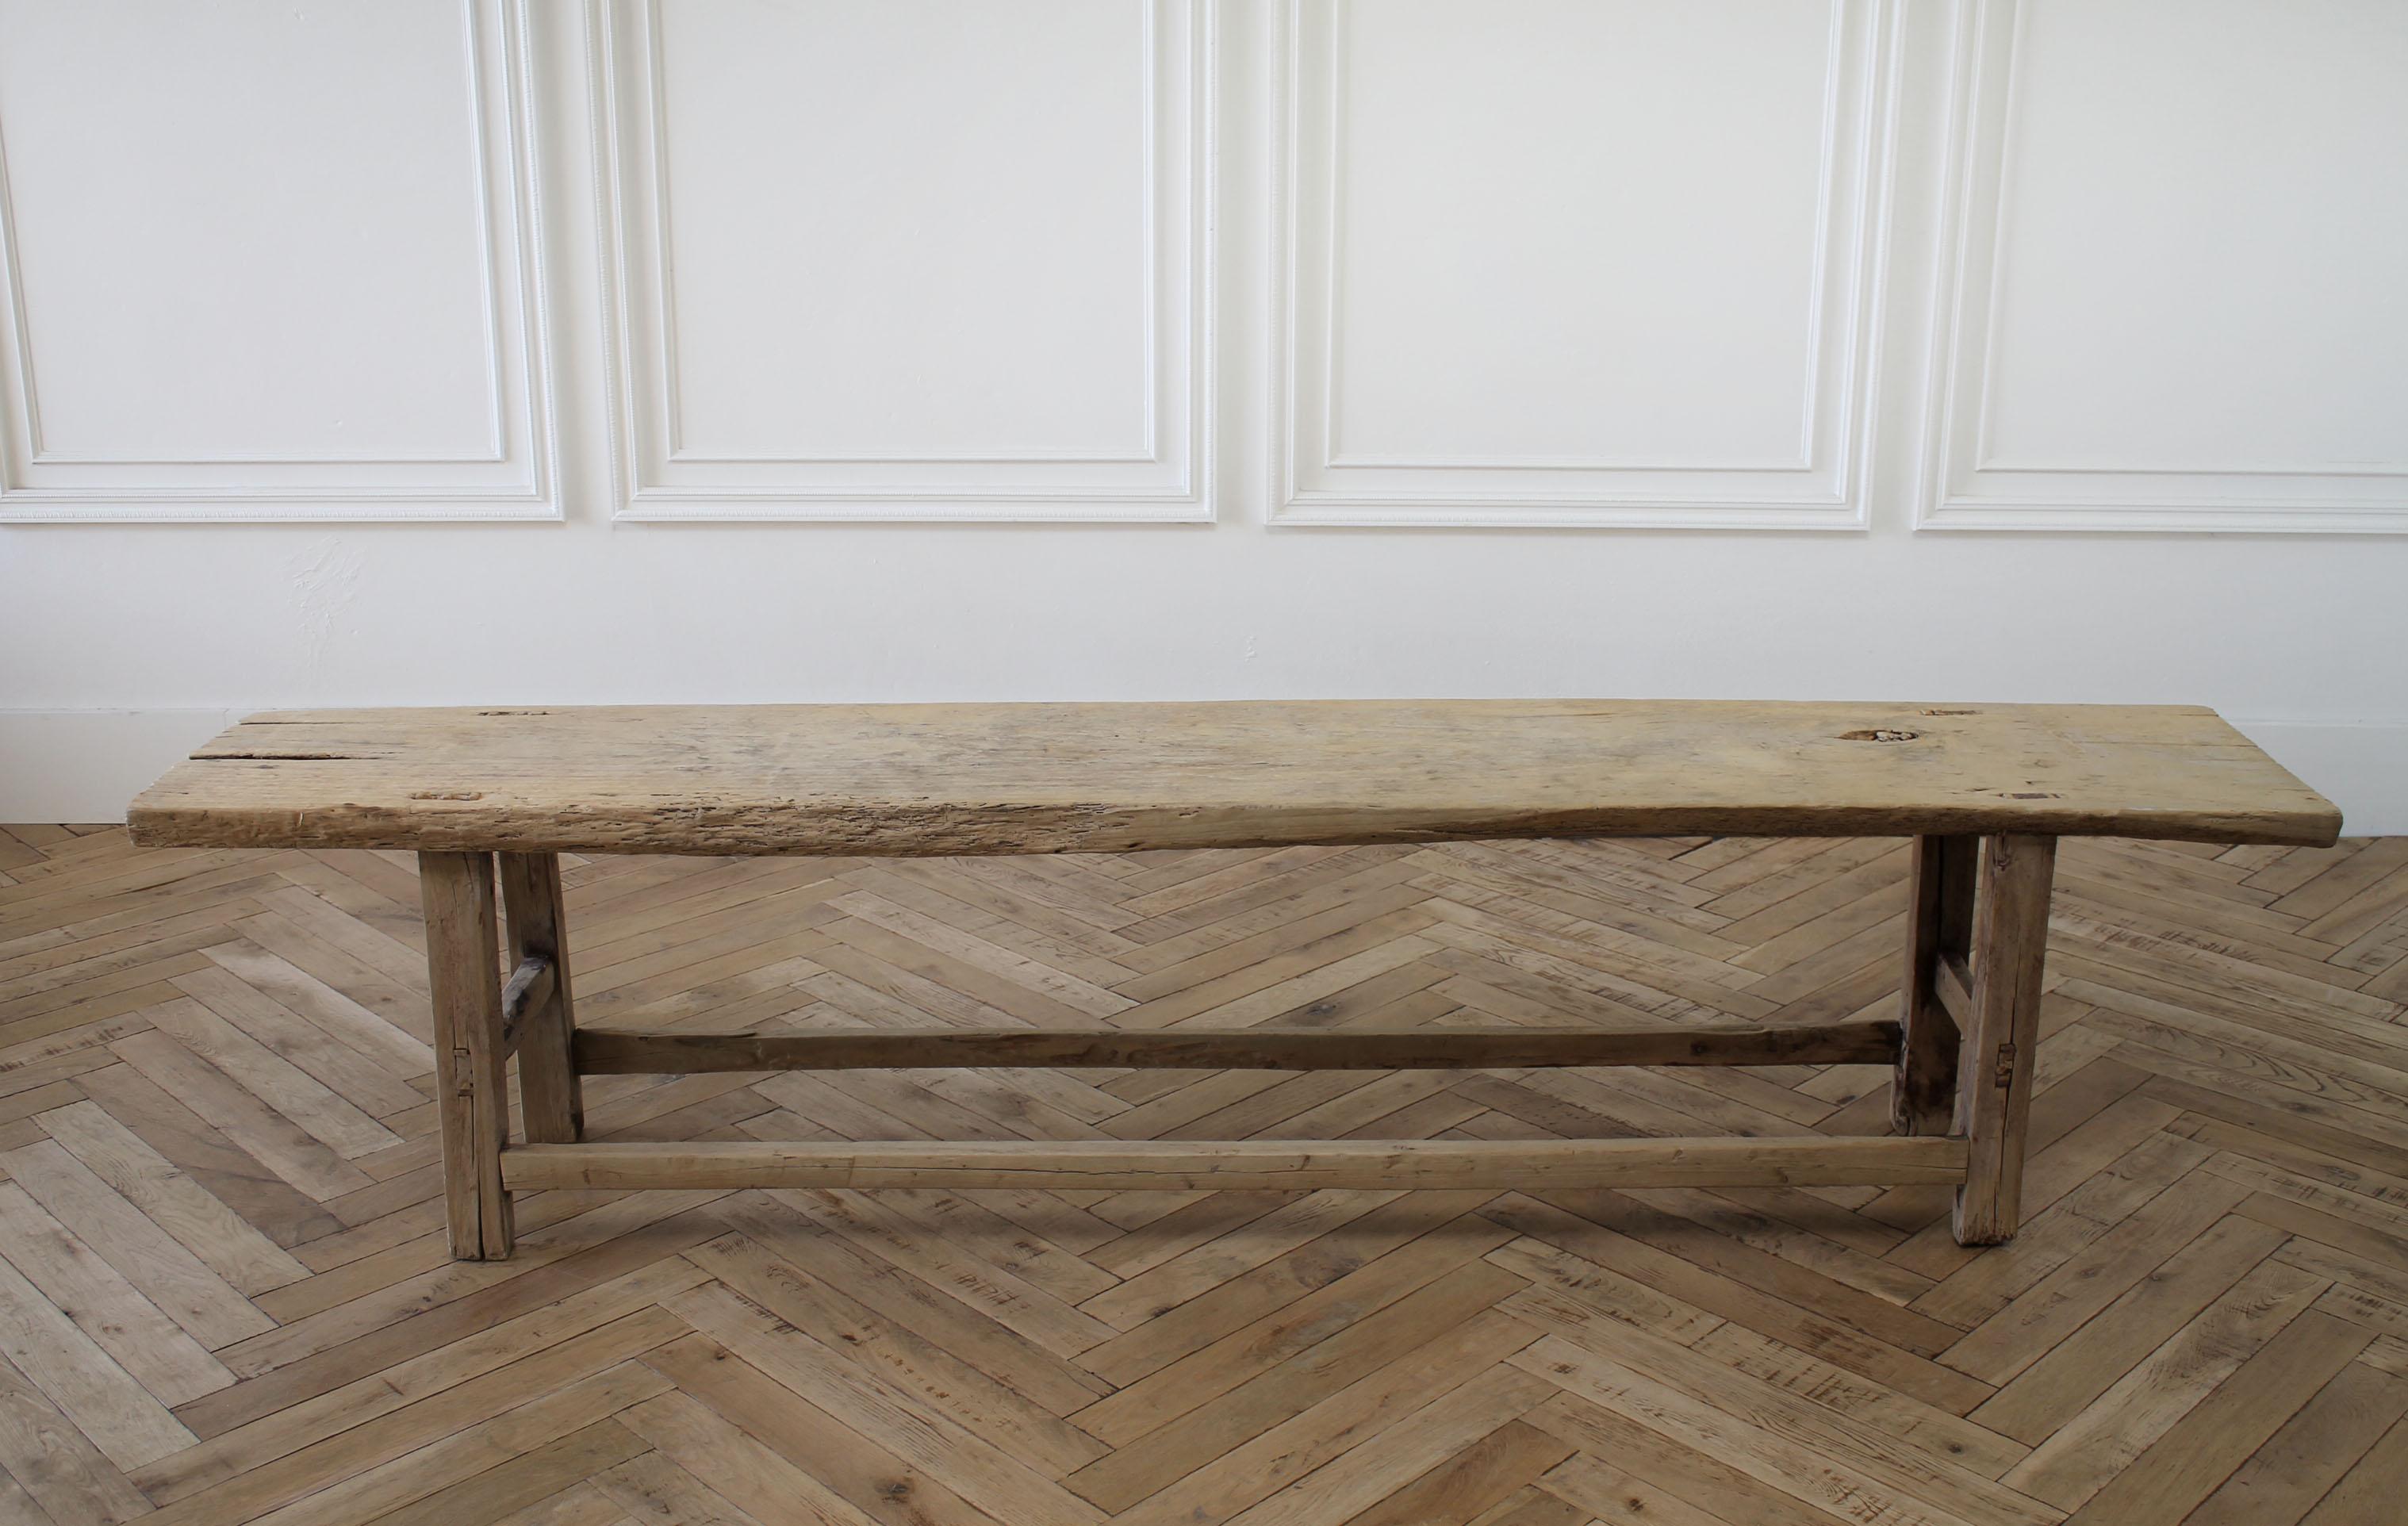 Antique elm wood coffee table bench
Beautiful light wood tone with lots of patina. The surface of the table is flat, this is solid and sturdy, ready for everyday use. Can be used as a bench, or as a coffee table.
Measures: 87